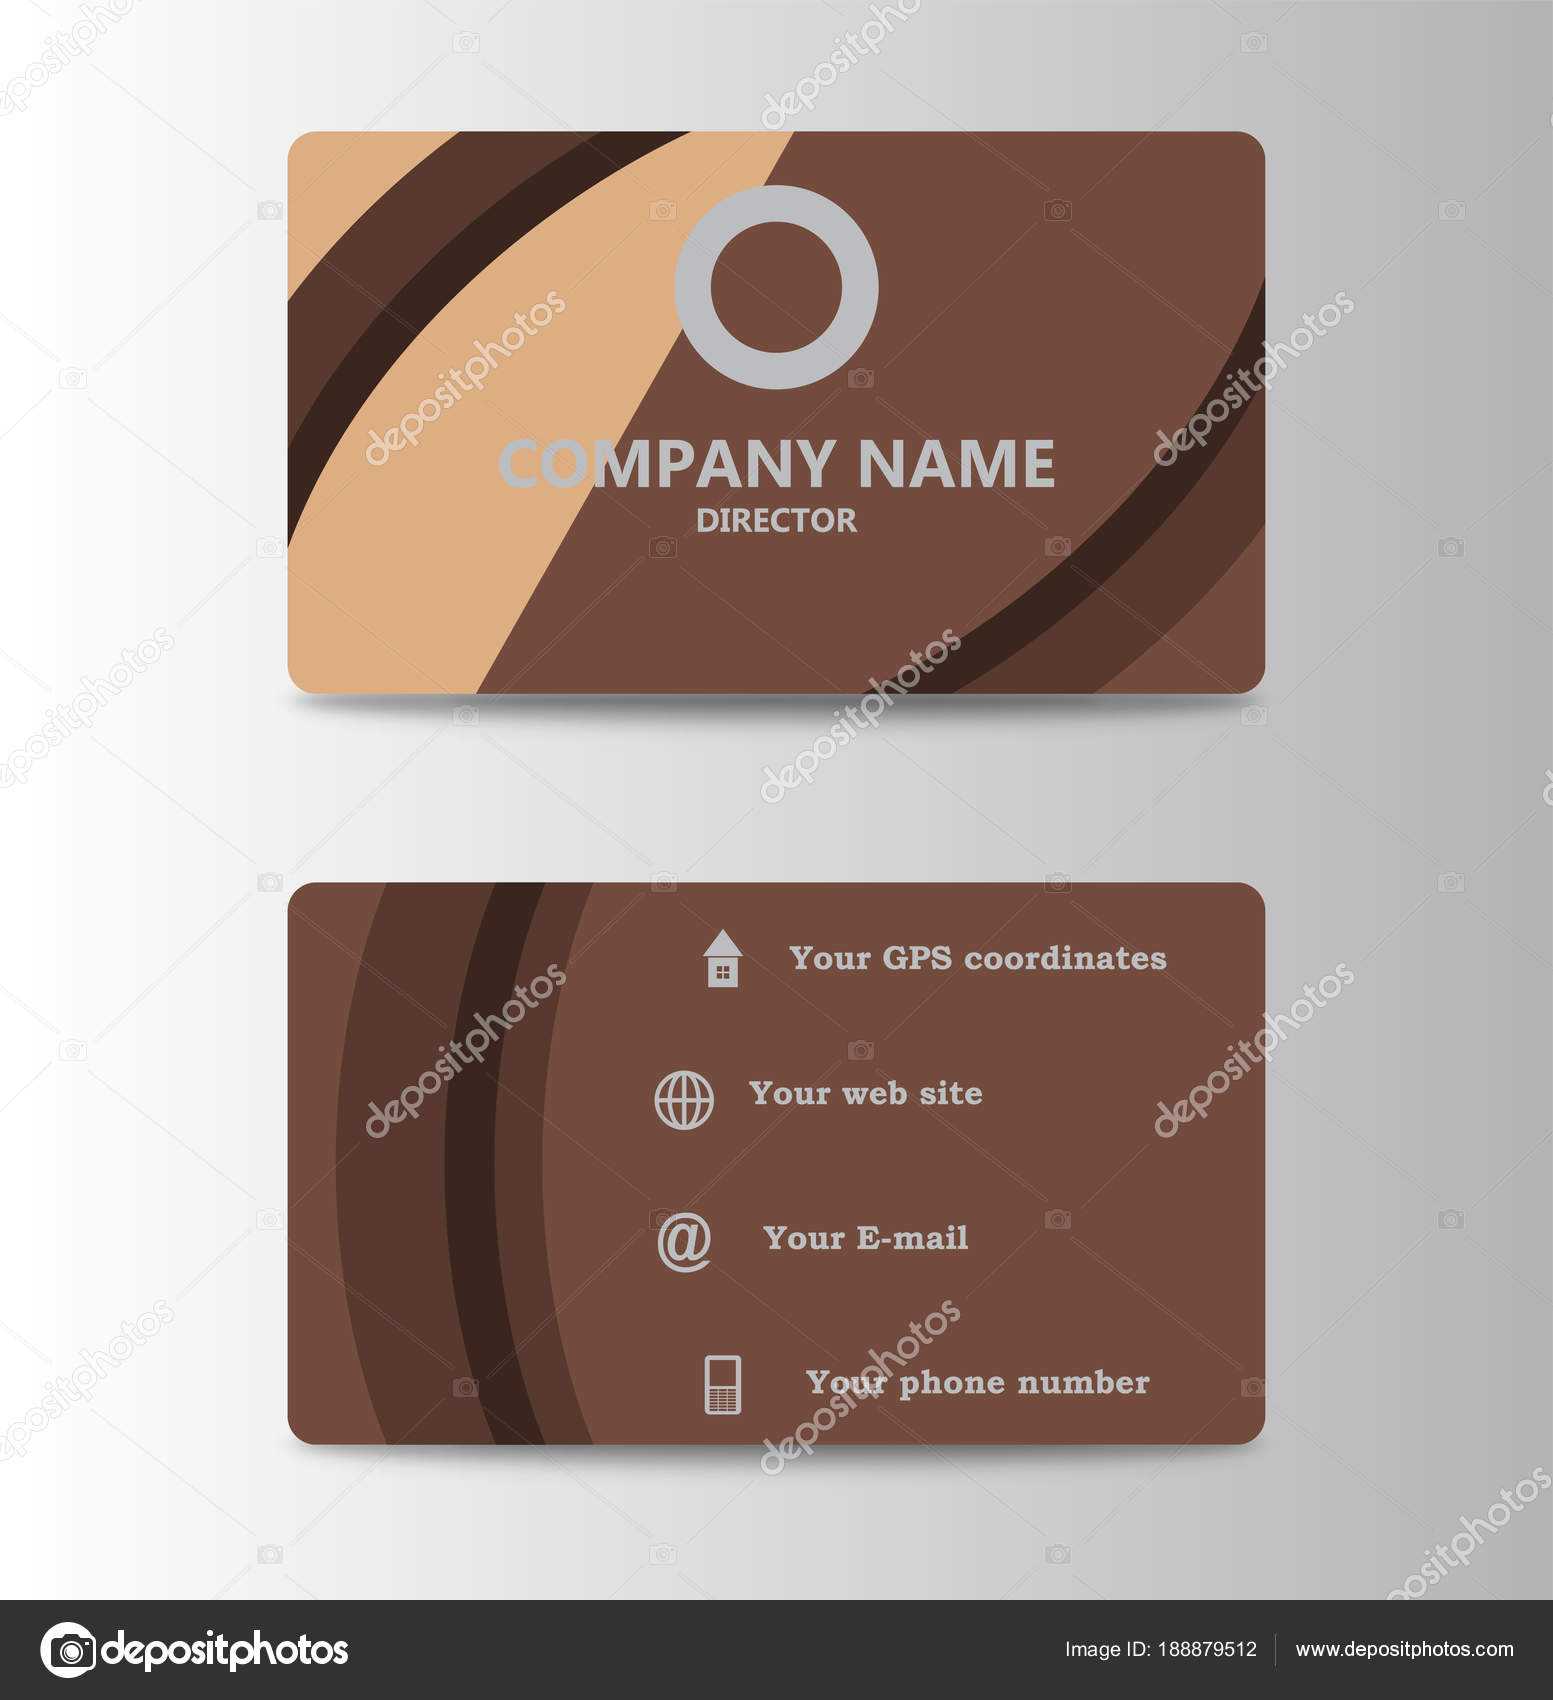 Corporate Id Card Design Template. Personal Id Card For With Regard To Personal Identification Card Template